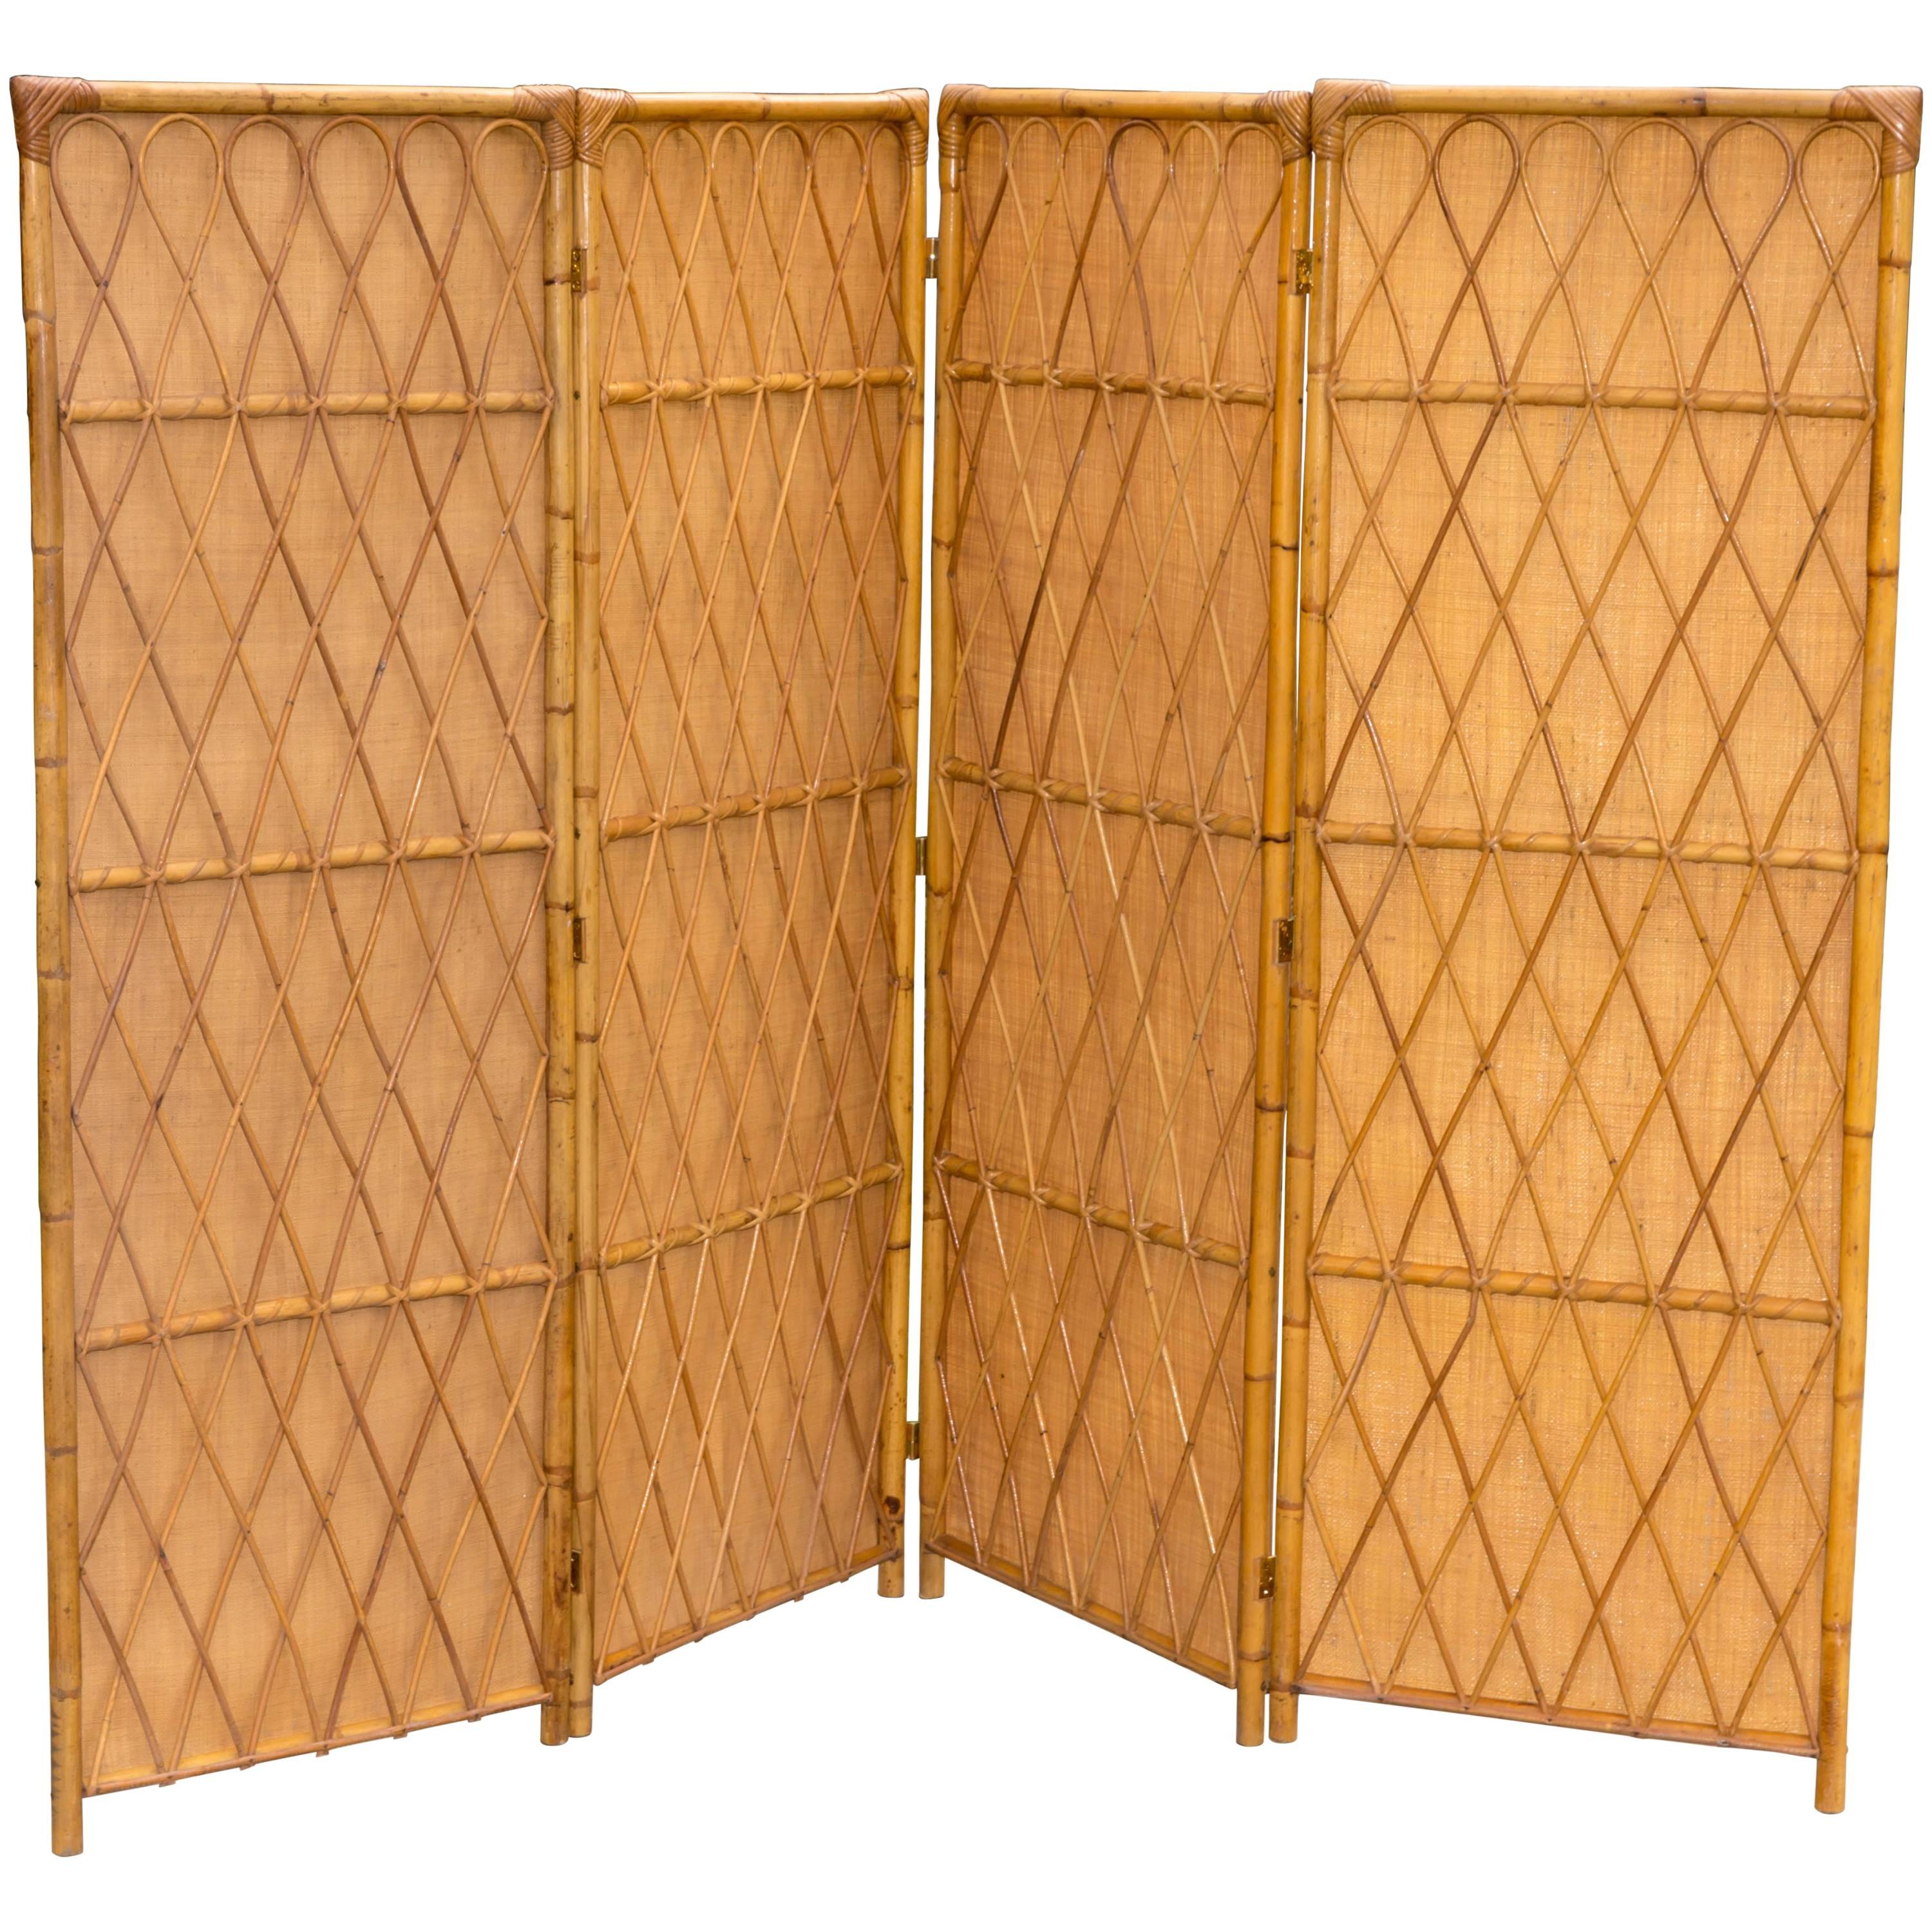 "Three" Panel Rattan Screen with Inserted Woven Grass Panels for Privacy